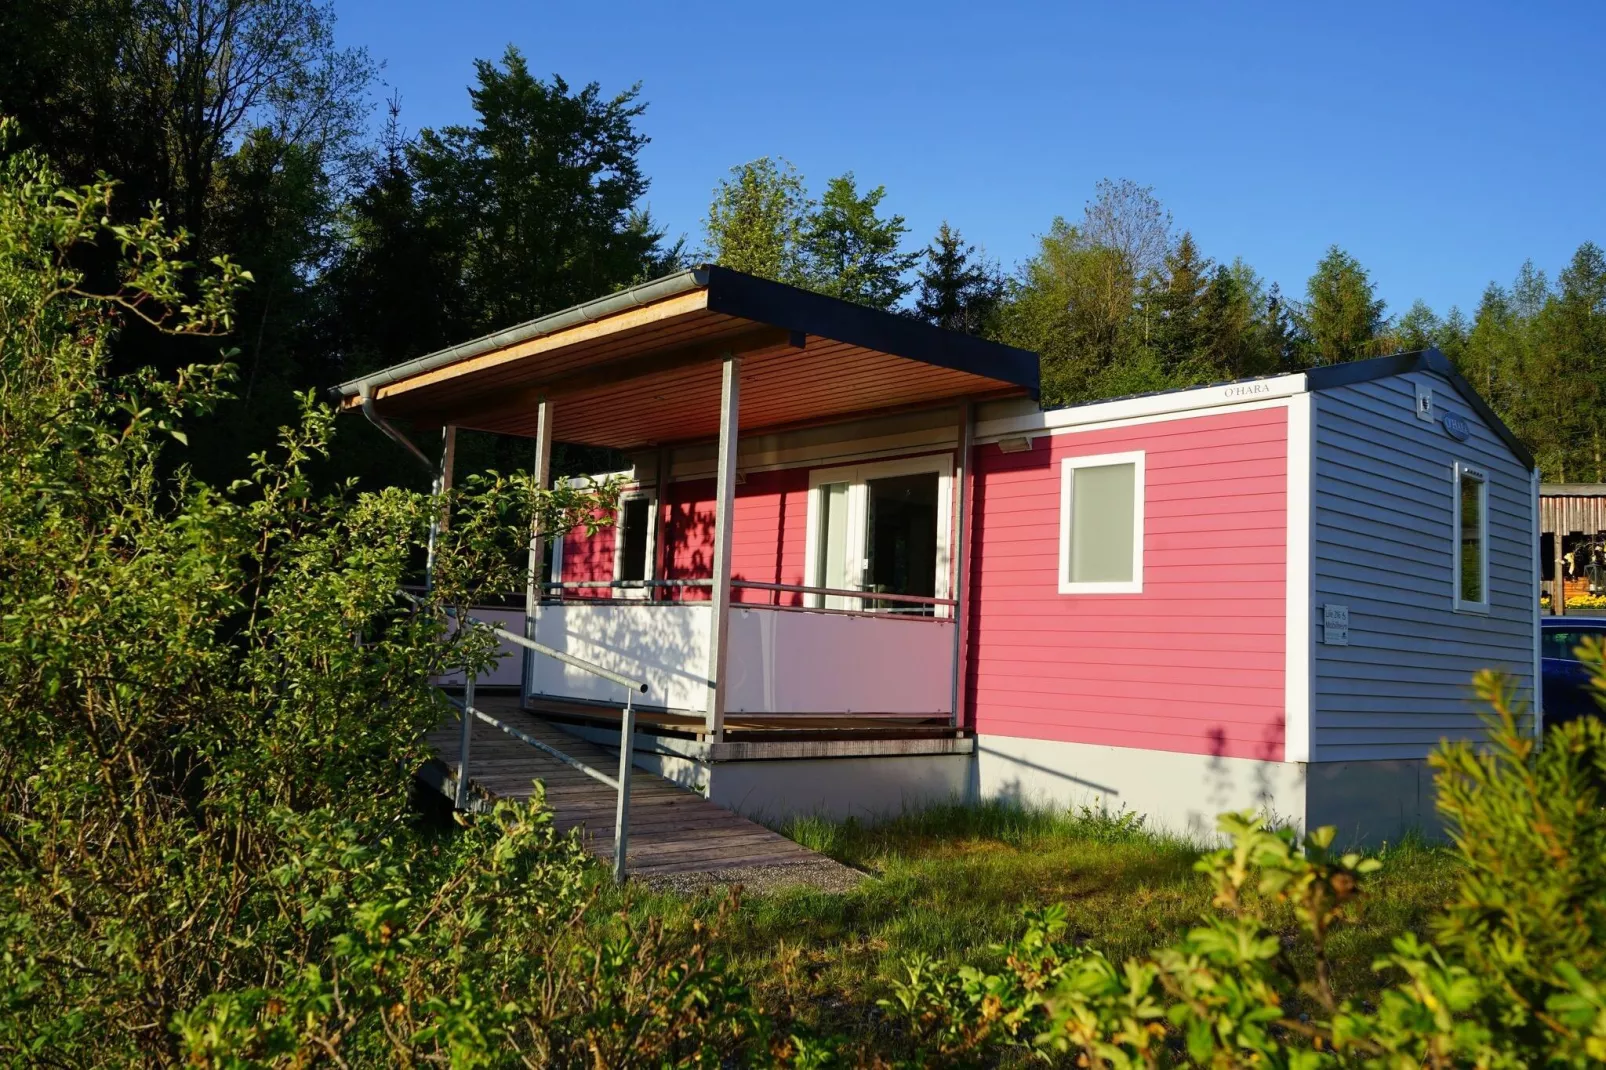 Camping Harfenmühle